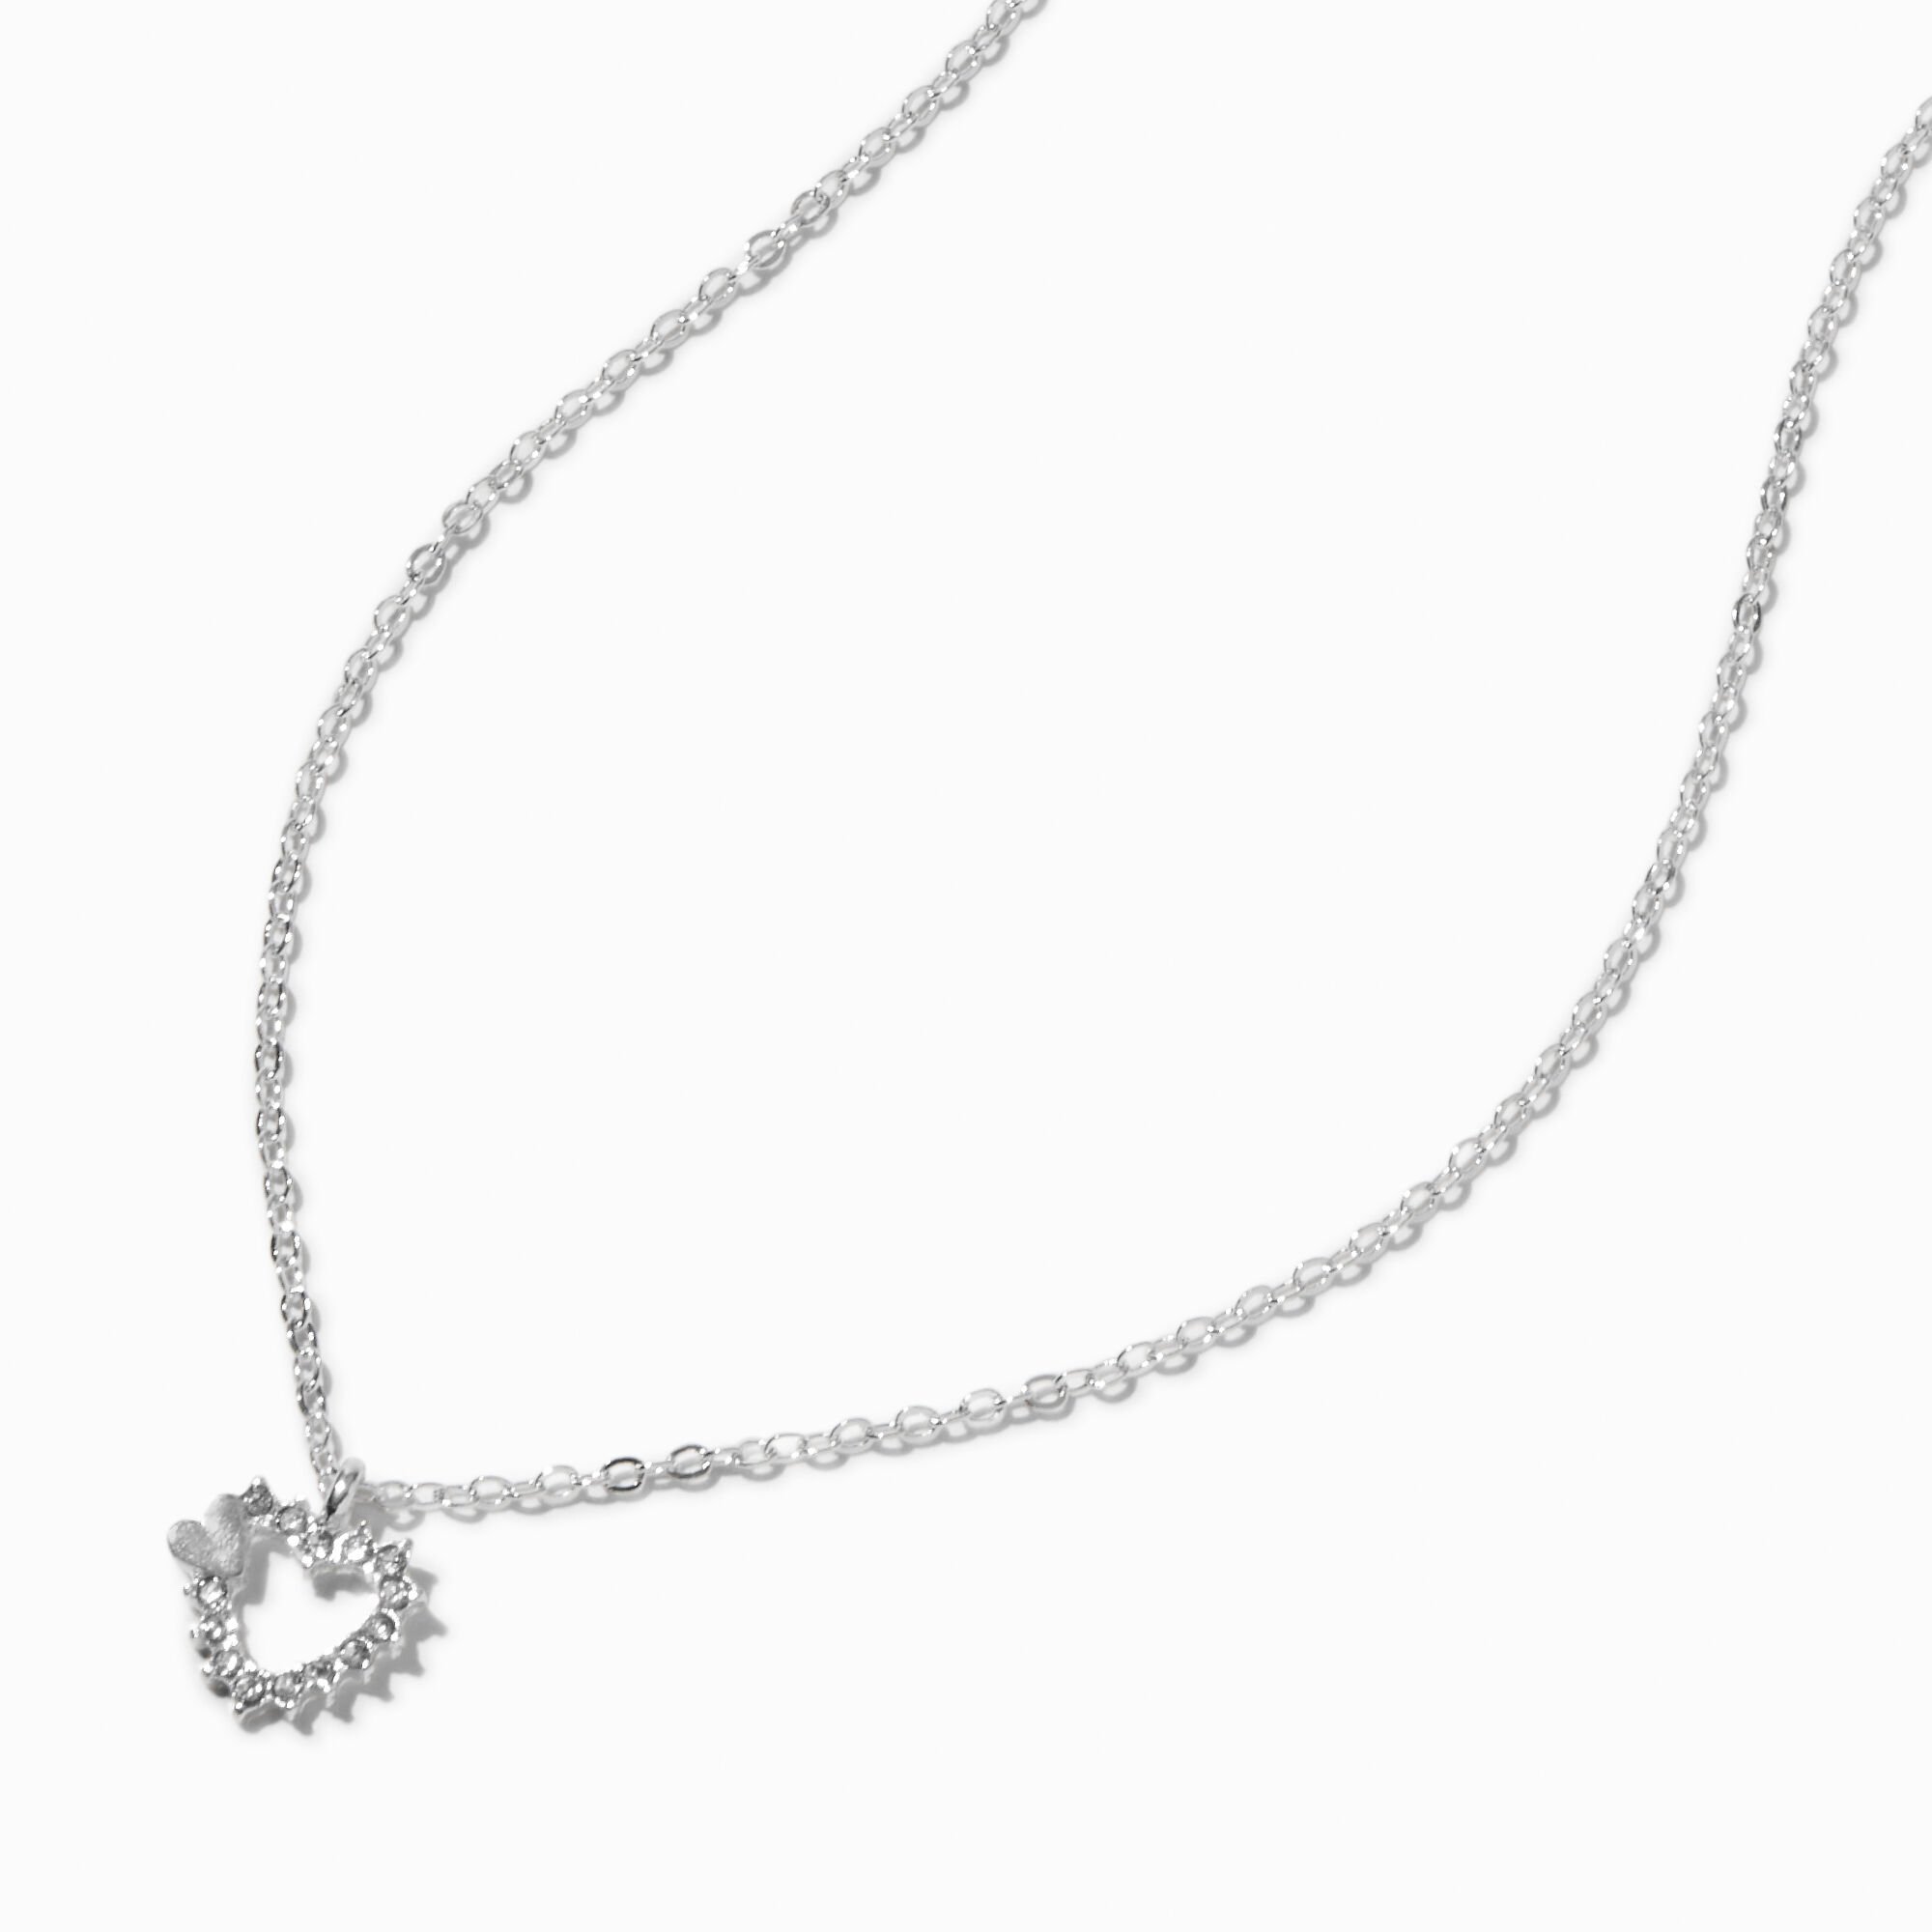 View Claires Tone Crystal Heart Pendant Necklace Silver information